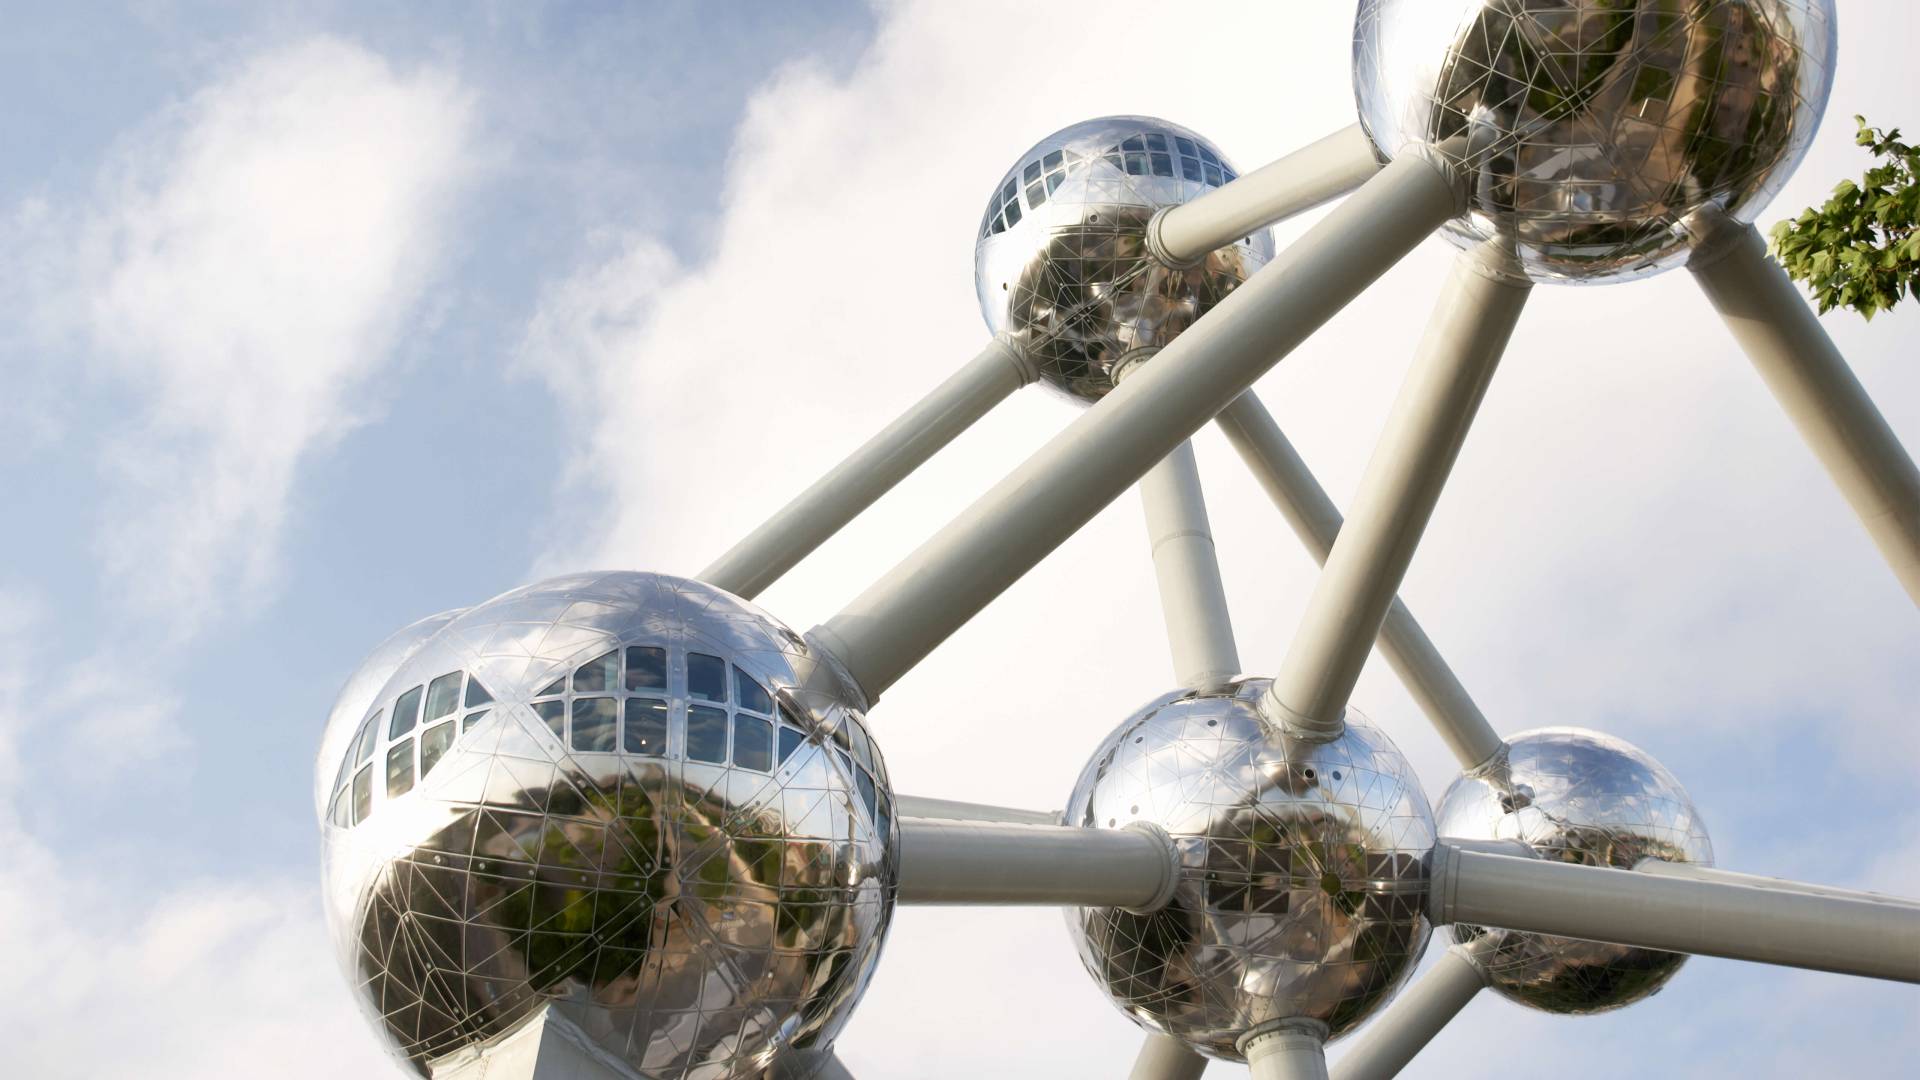 The Atomium structure in Brussels